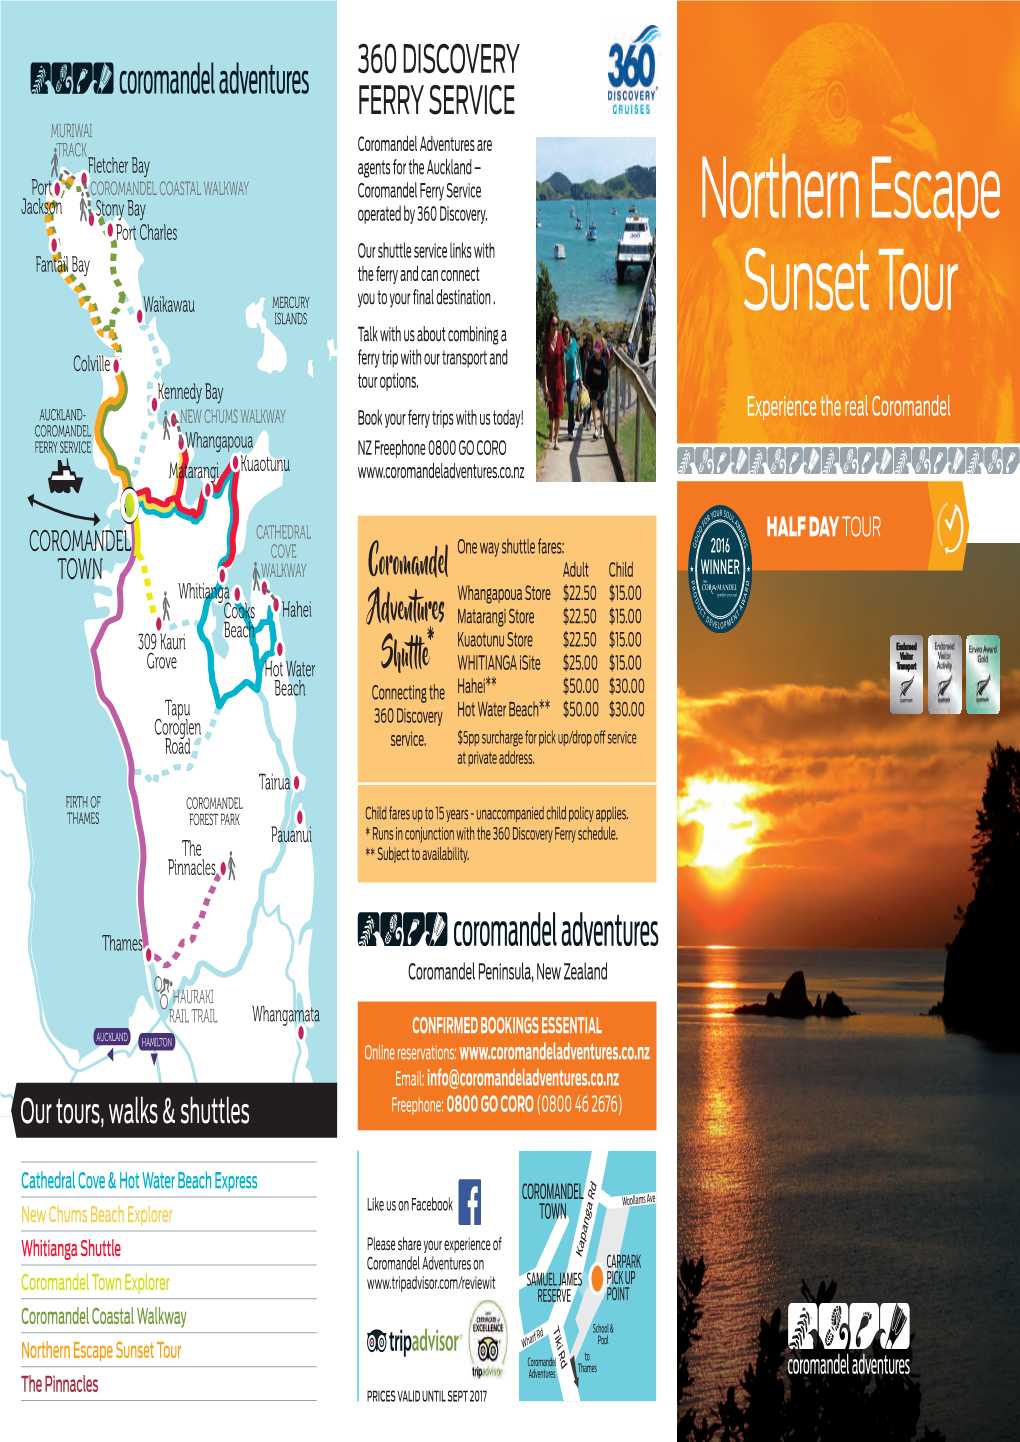 Northern Escape Sunset Tour Coromandel to Adventures Thames the Pinnacles Prices Valid Until Sept 2017